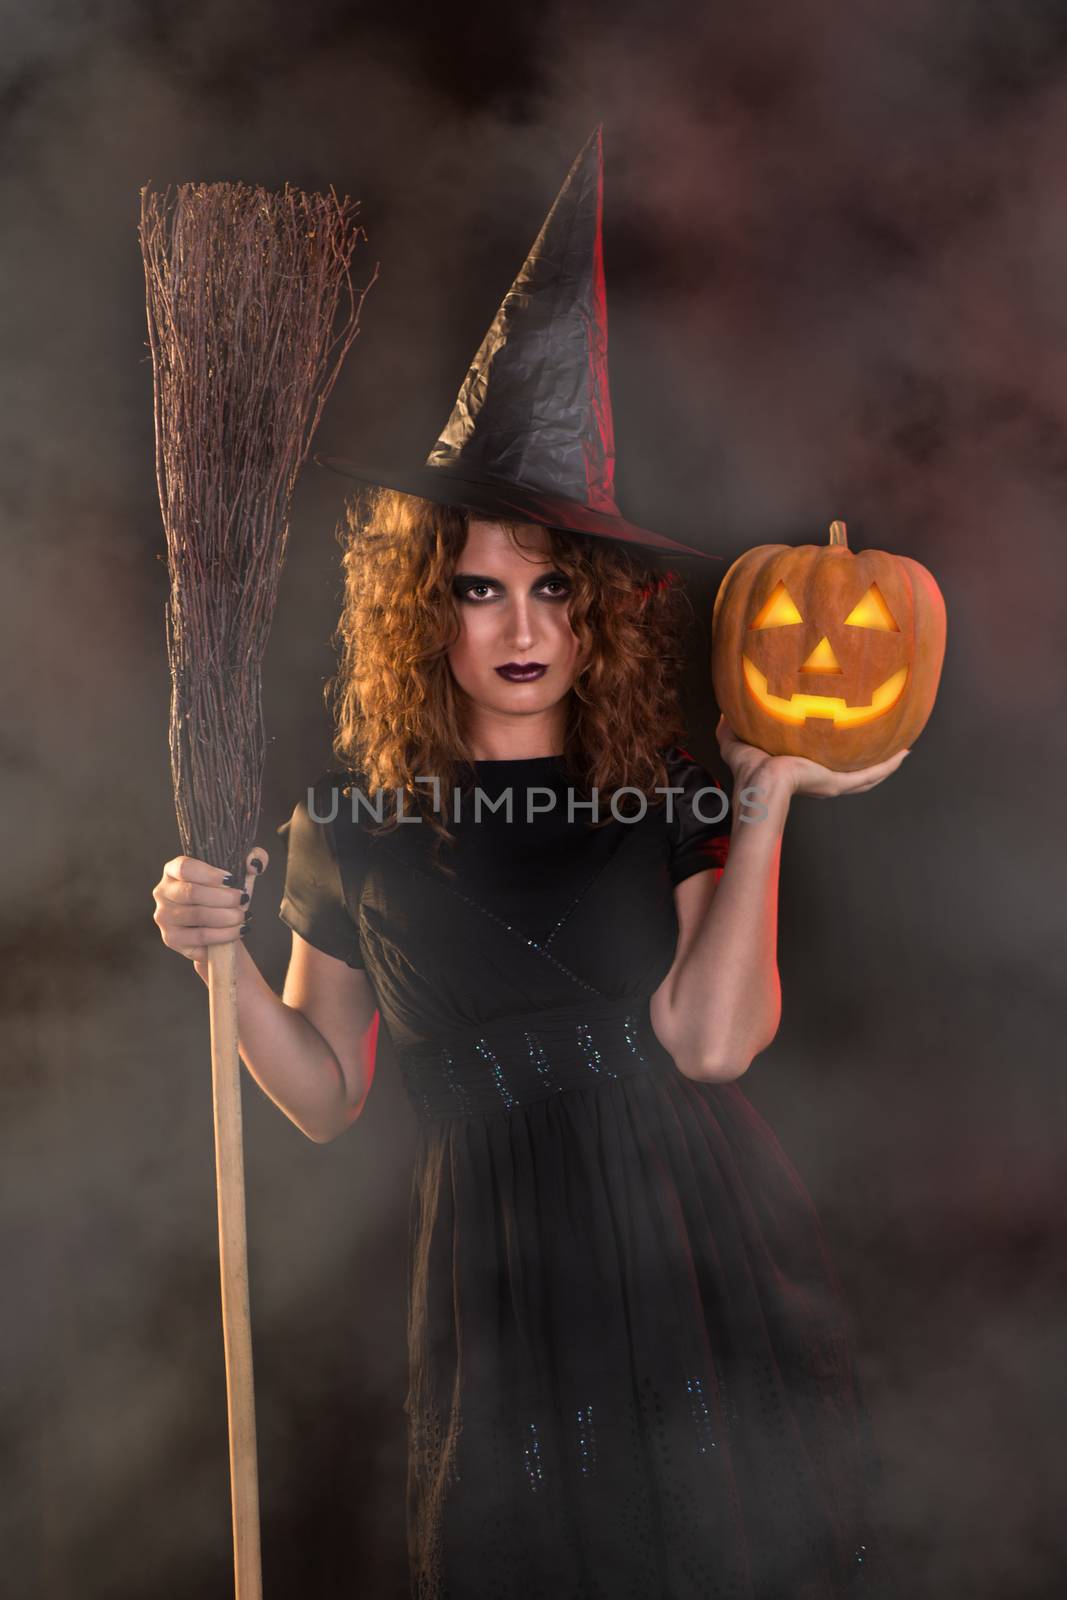 Young woman dressed like a witch. She is in dark clothing and holding broom and pumpkin.